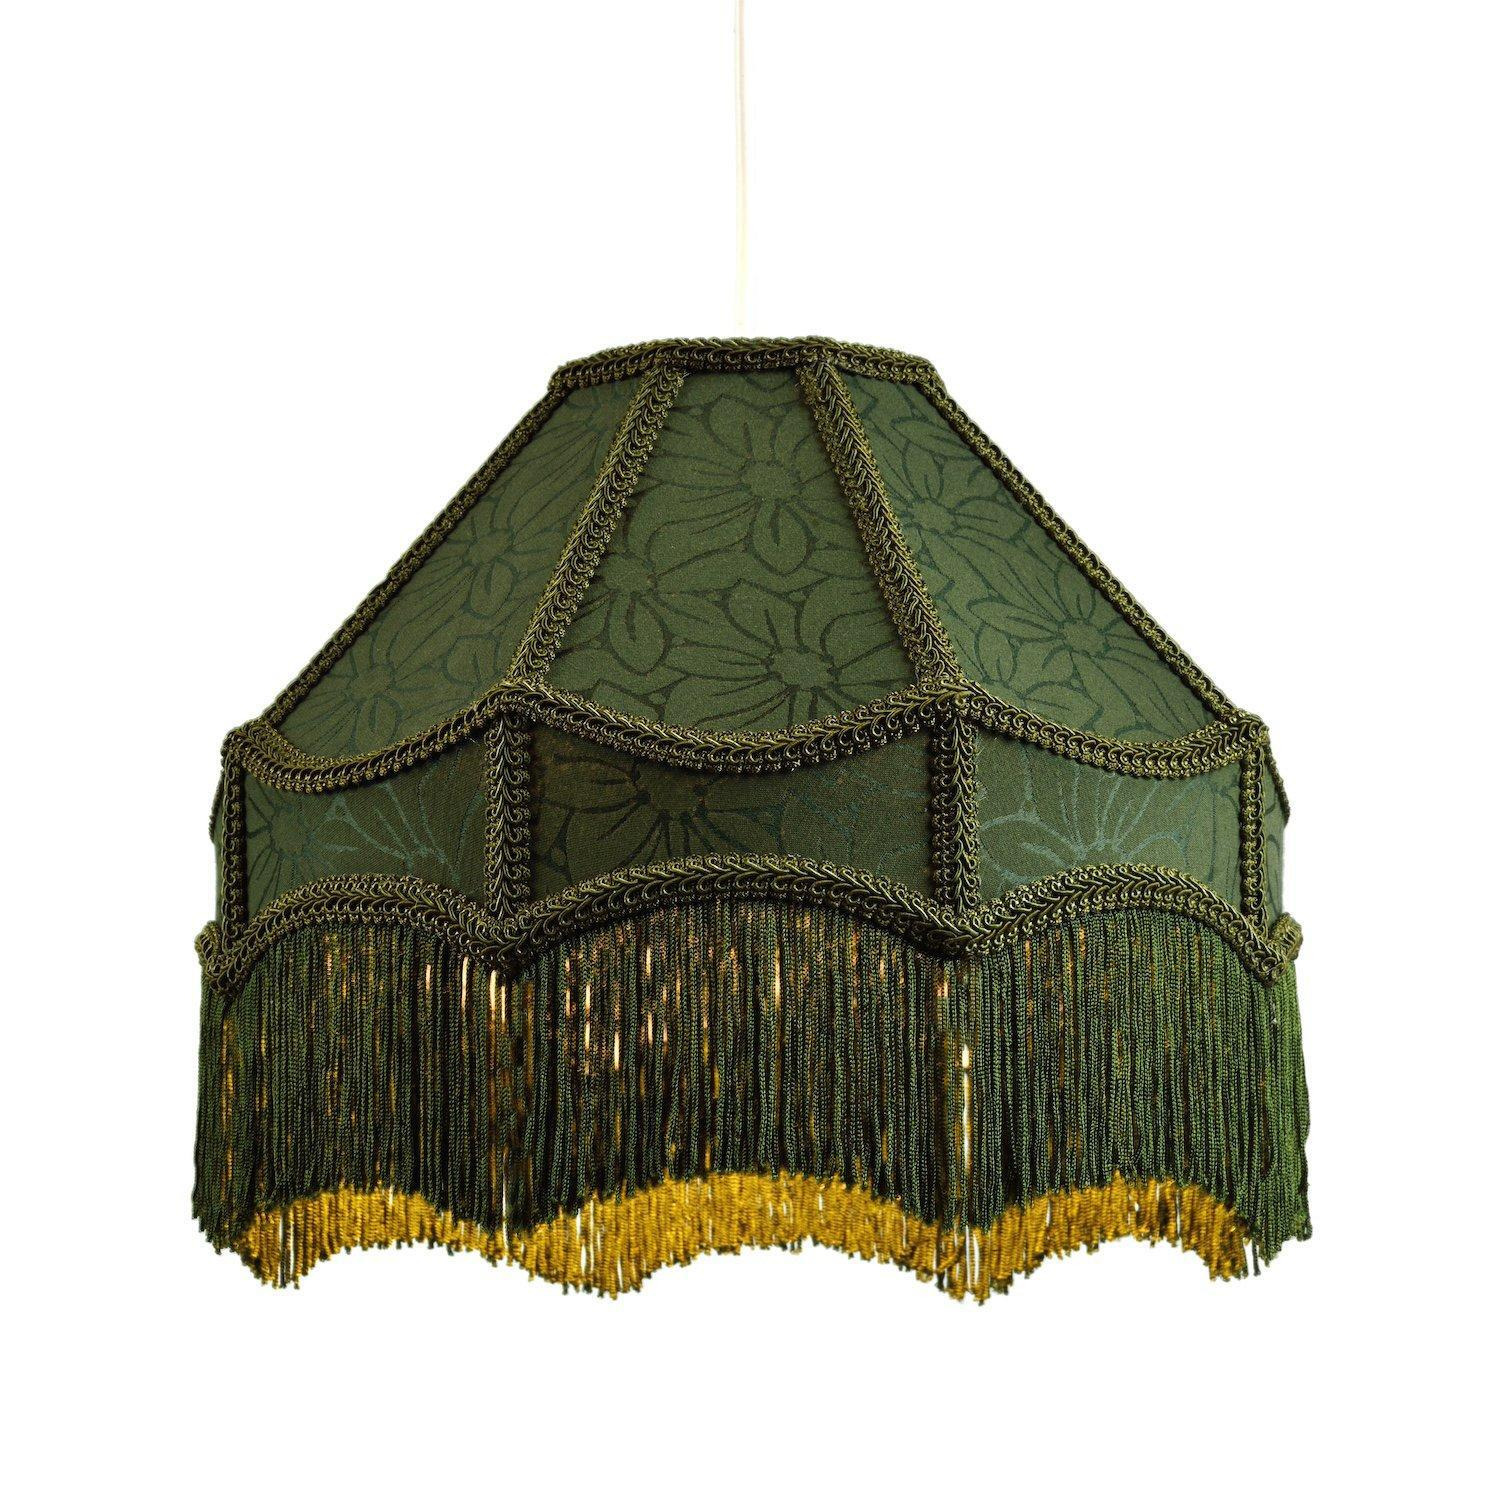 Classic Victorian Style Empire Pendant Shade in Forest Green Fabric with Tassels - image 1